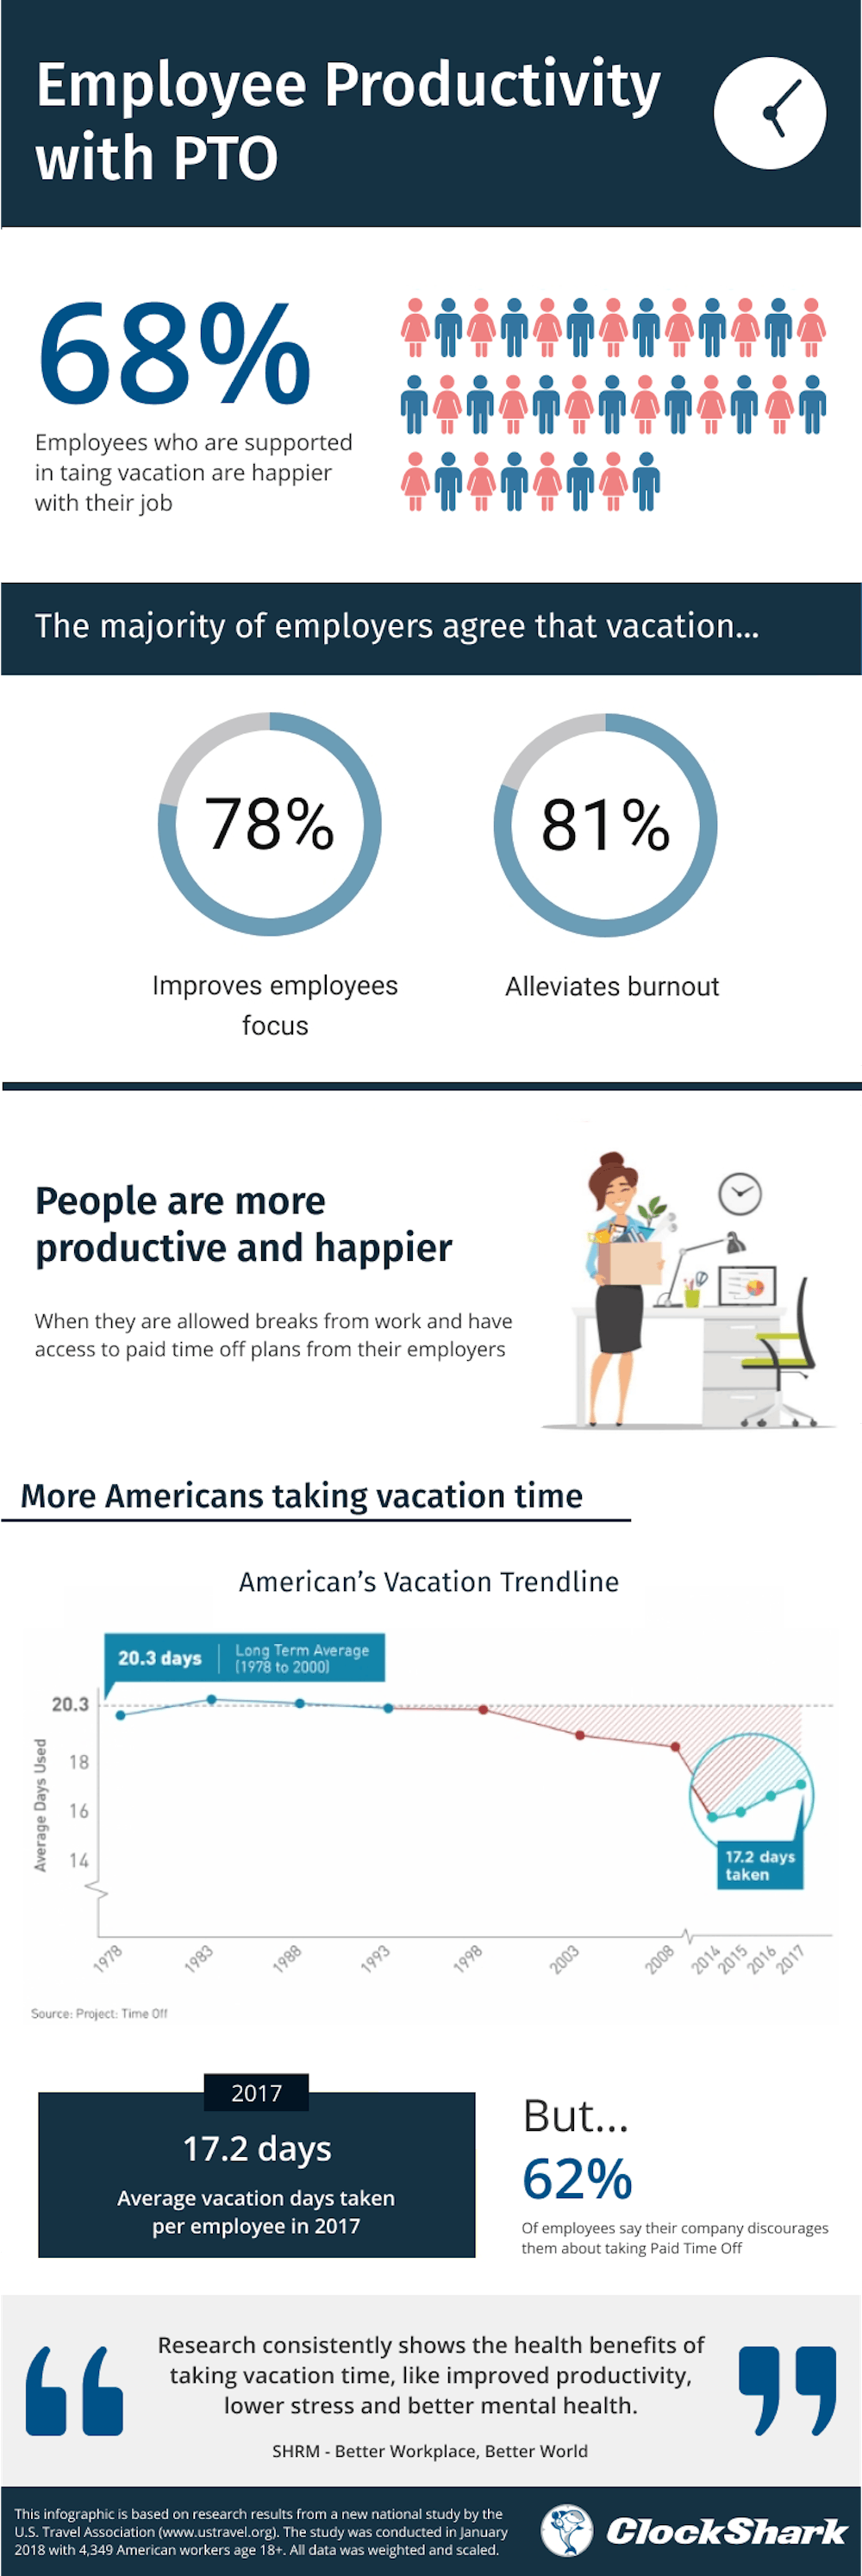 Employee Productivity with PTO